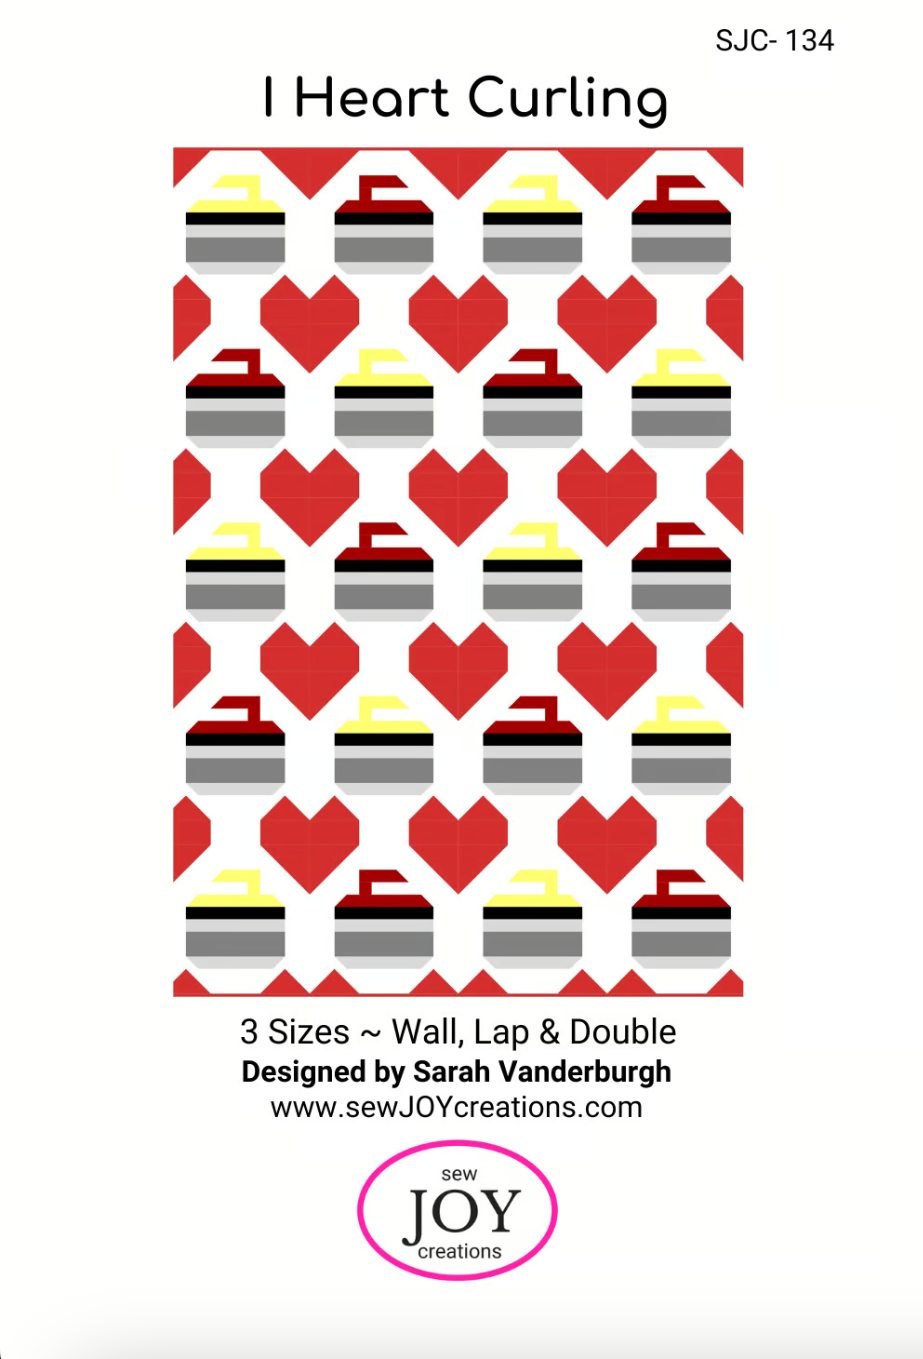 I Heart Curling Downloadable Pattern by Sew Joy Creations